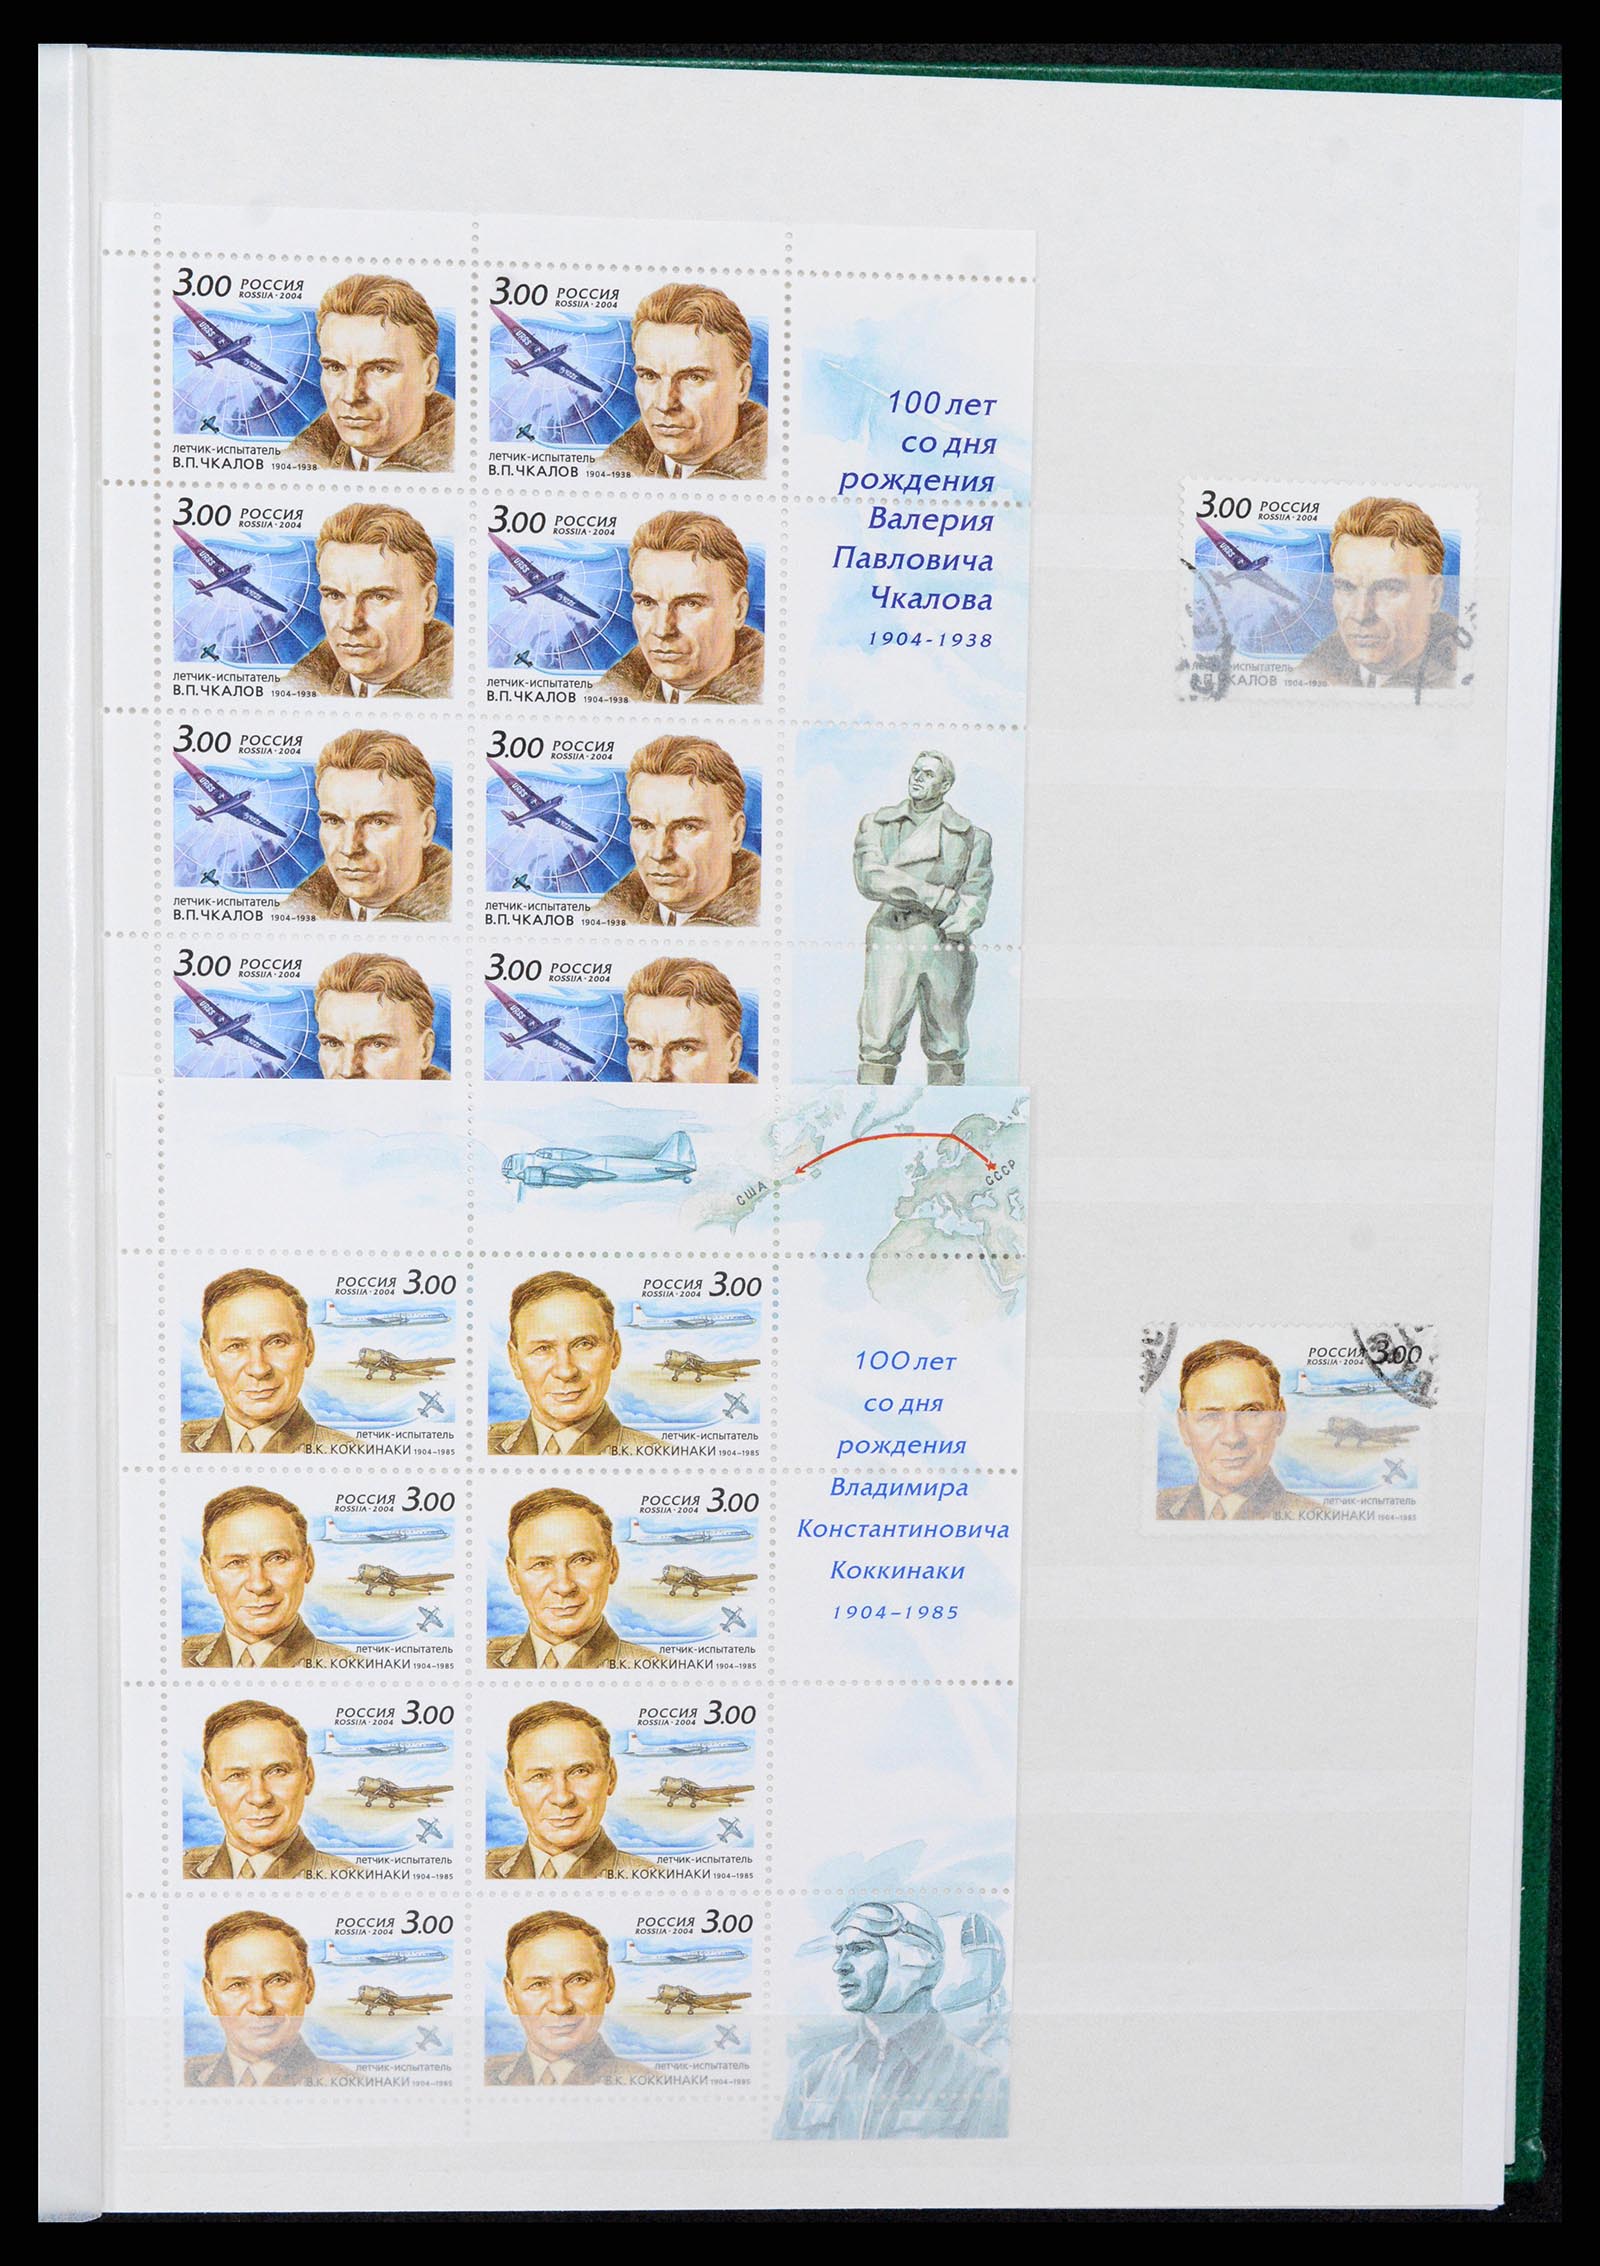 37283 043 - Stamp collection 37283 Russia 1999-2021!